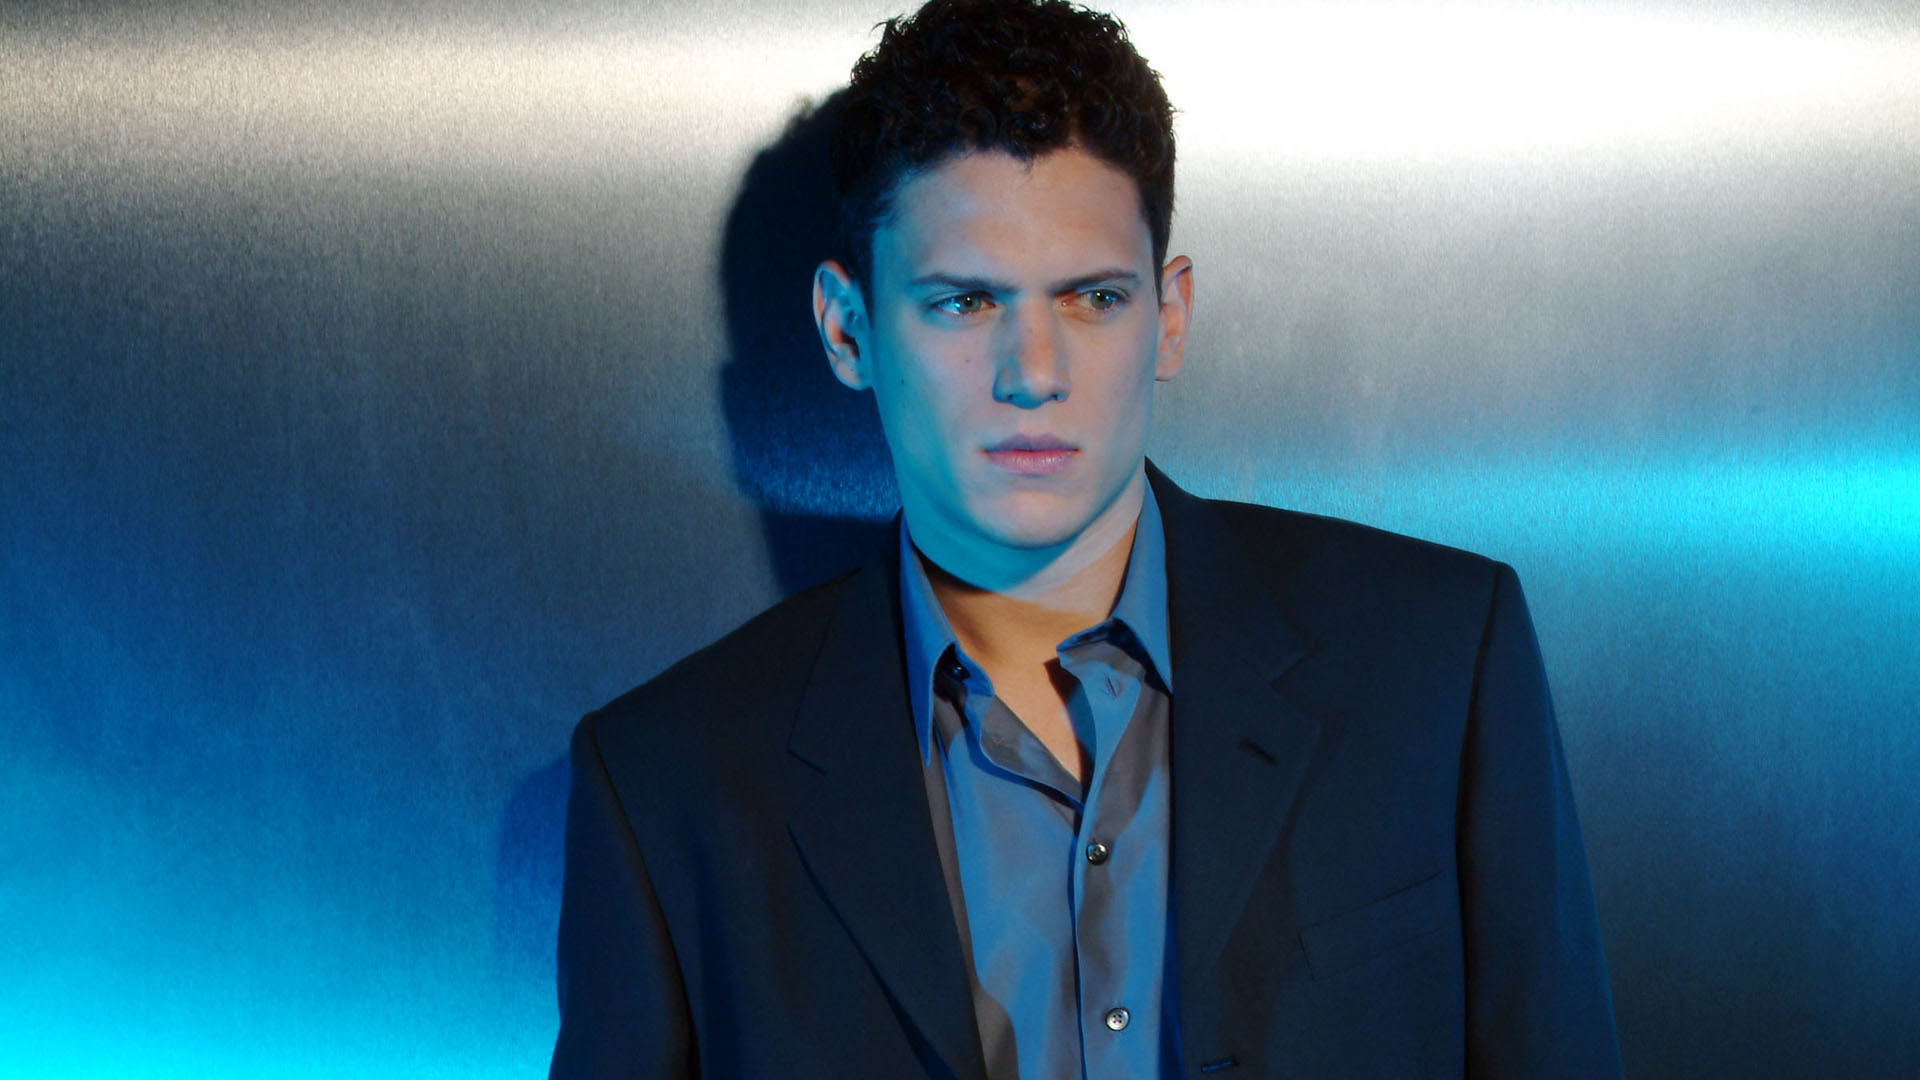 wentworth miller HD wallpapers, backgrounds